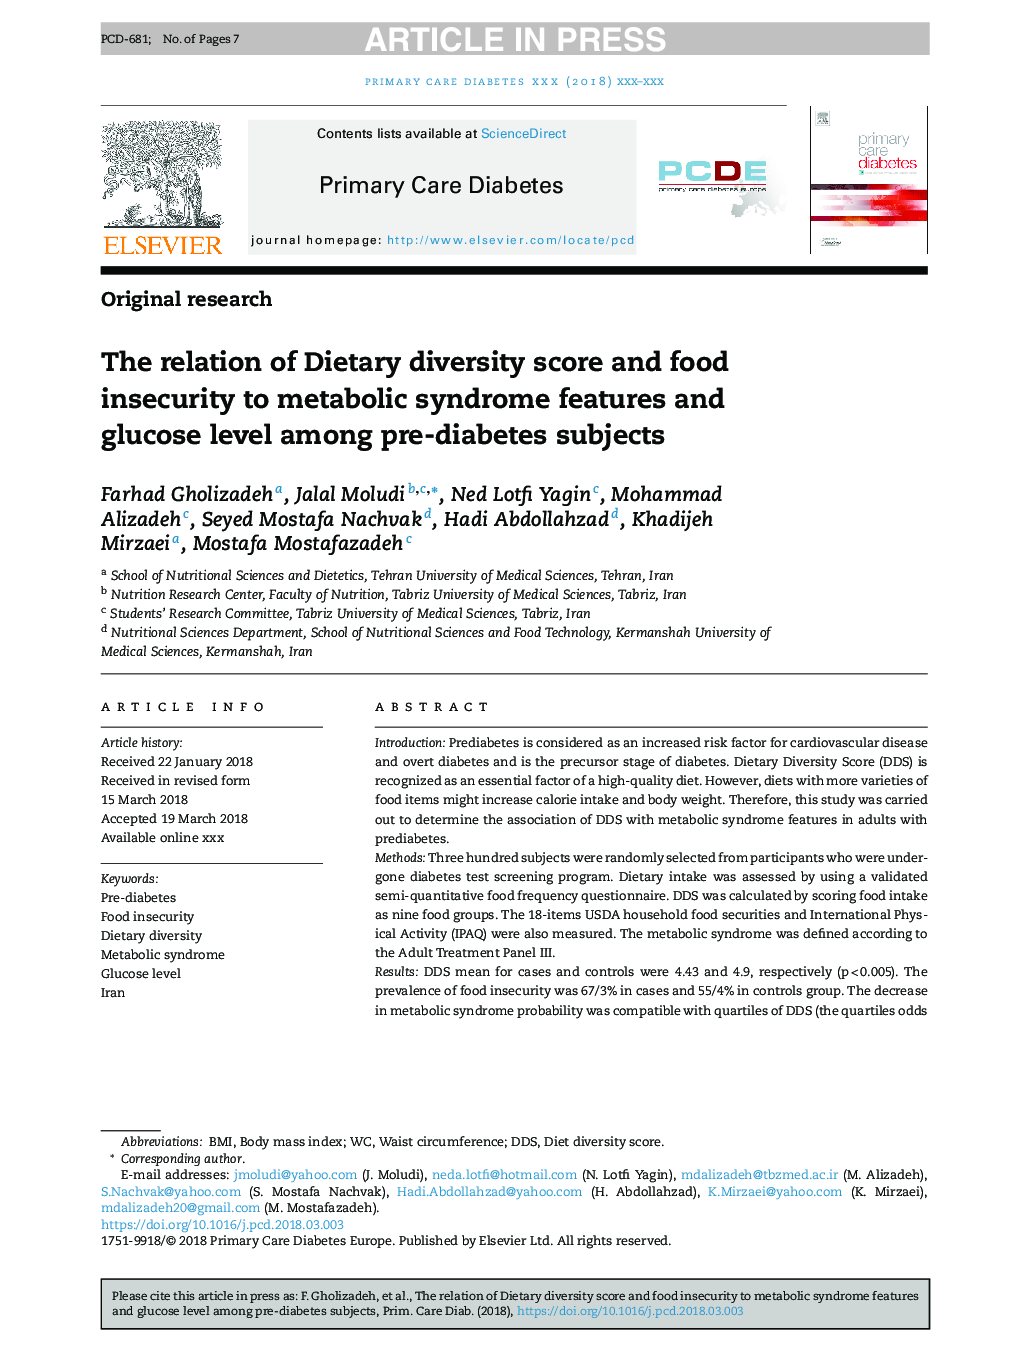 The relation of Dietary diversity score and food insecurity to metabolic syndrome features and glucose level among pre-diabetes subjects